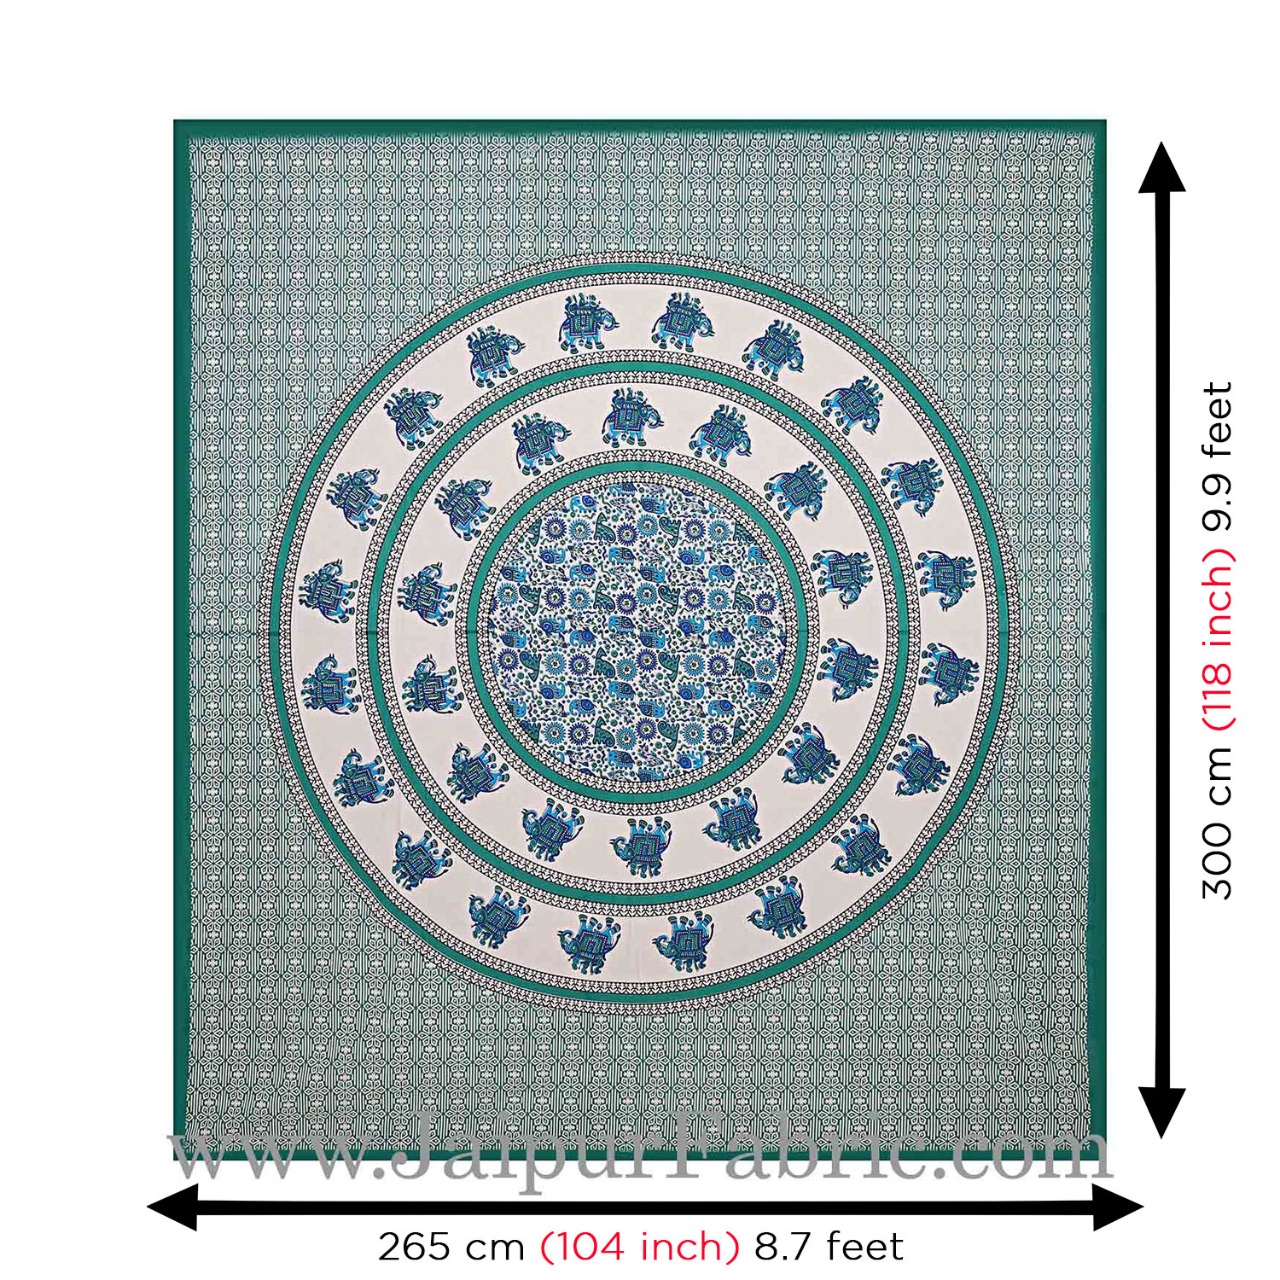 King Size Bedsheet Sea Green  Border Circle Elephant Pattern Screen Print With Two Pillow Cover